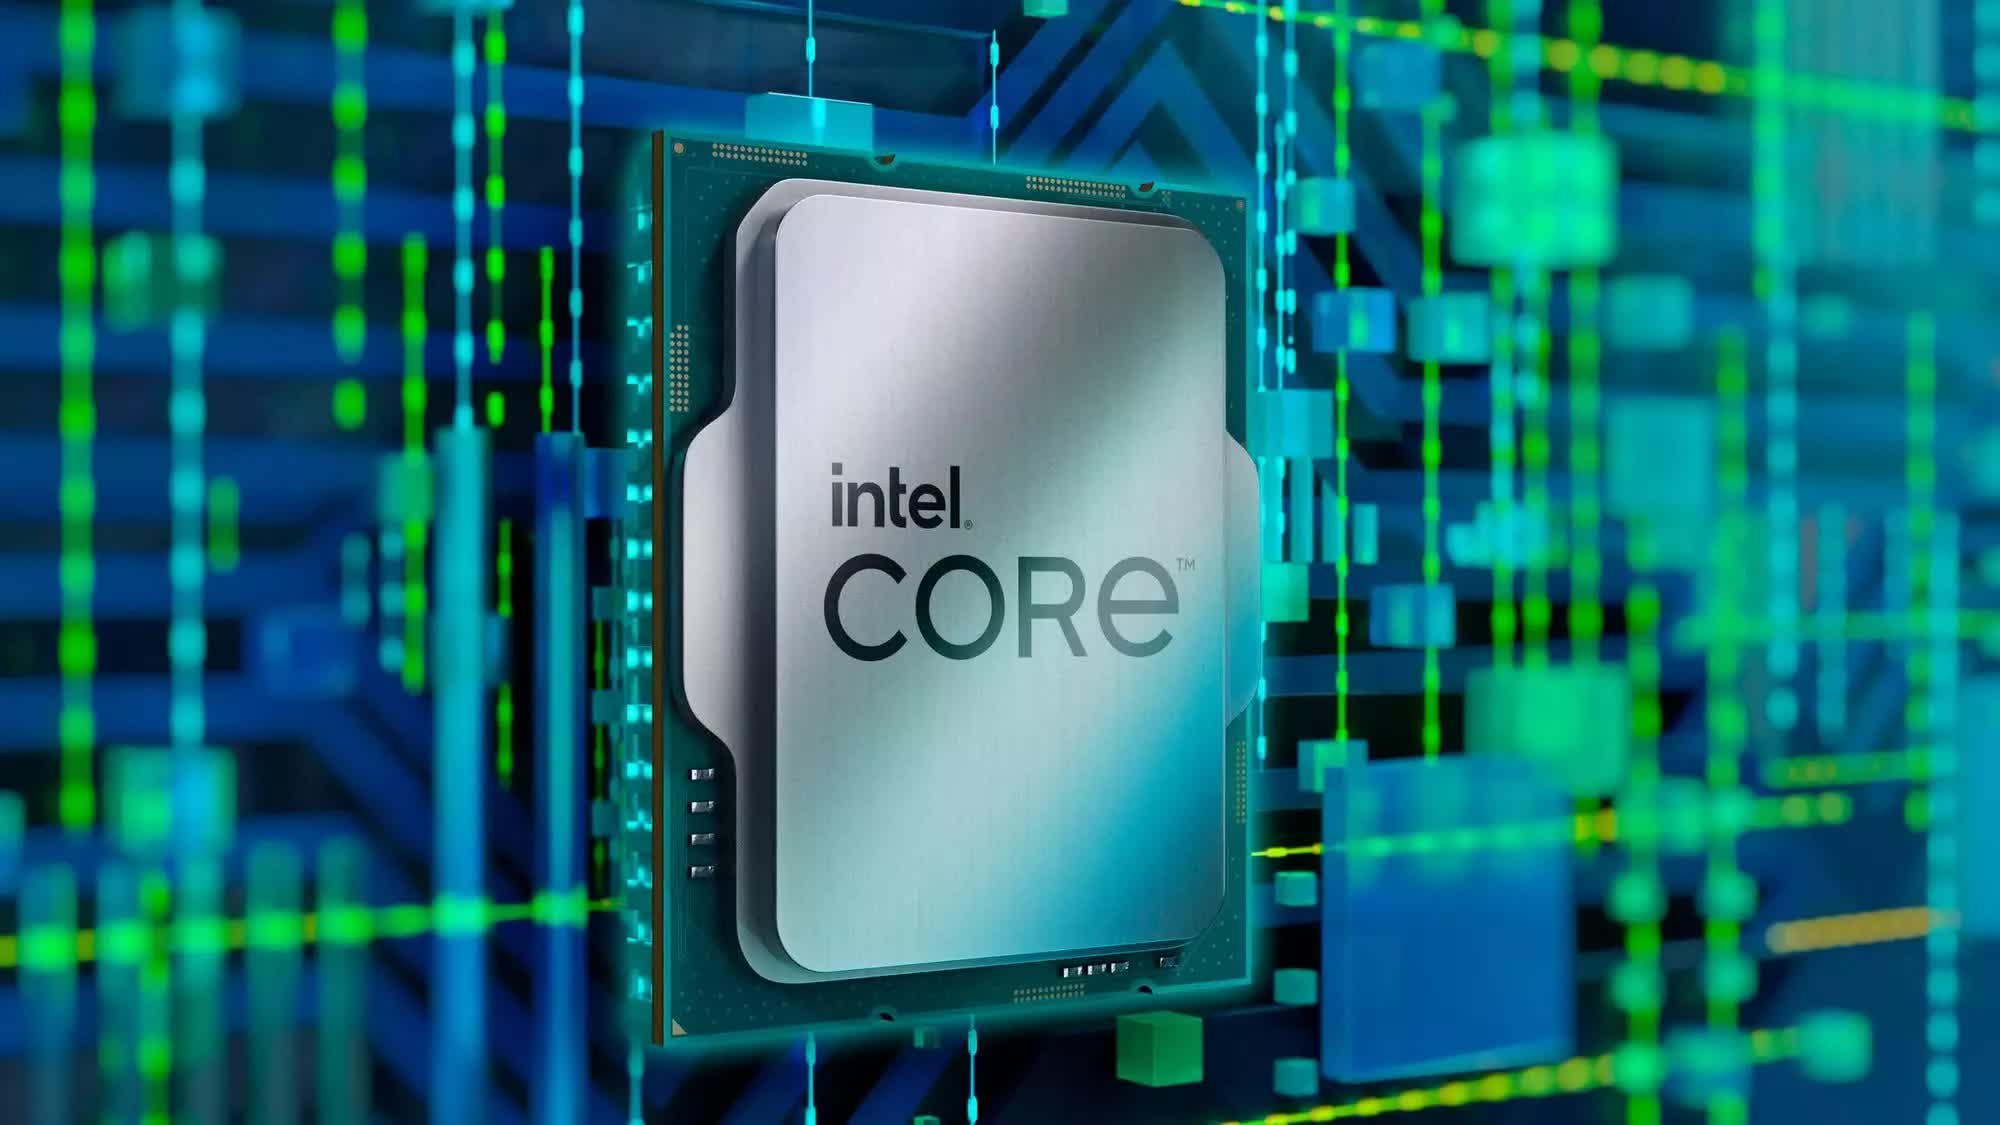 Intel Arrow Lake leak hints at more PCIe lanes and no DDR4 support